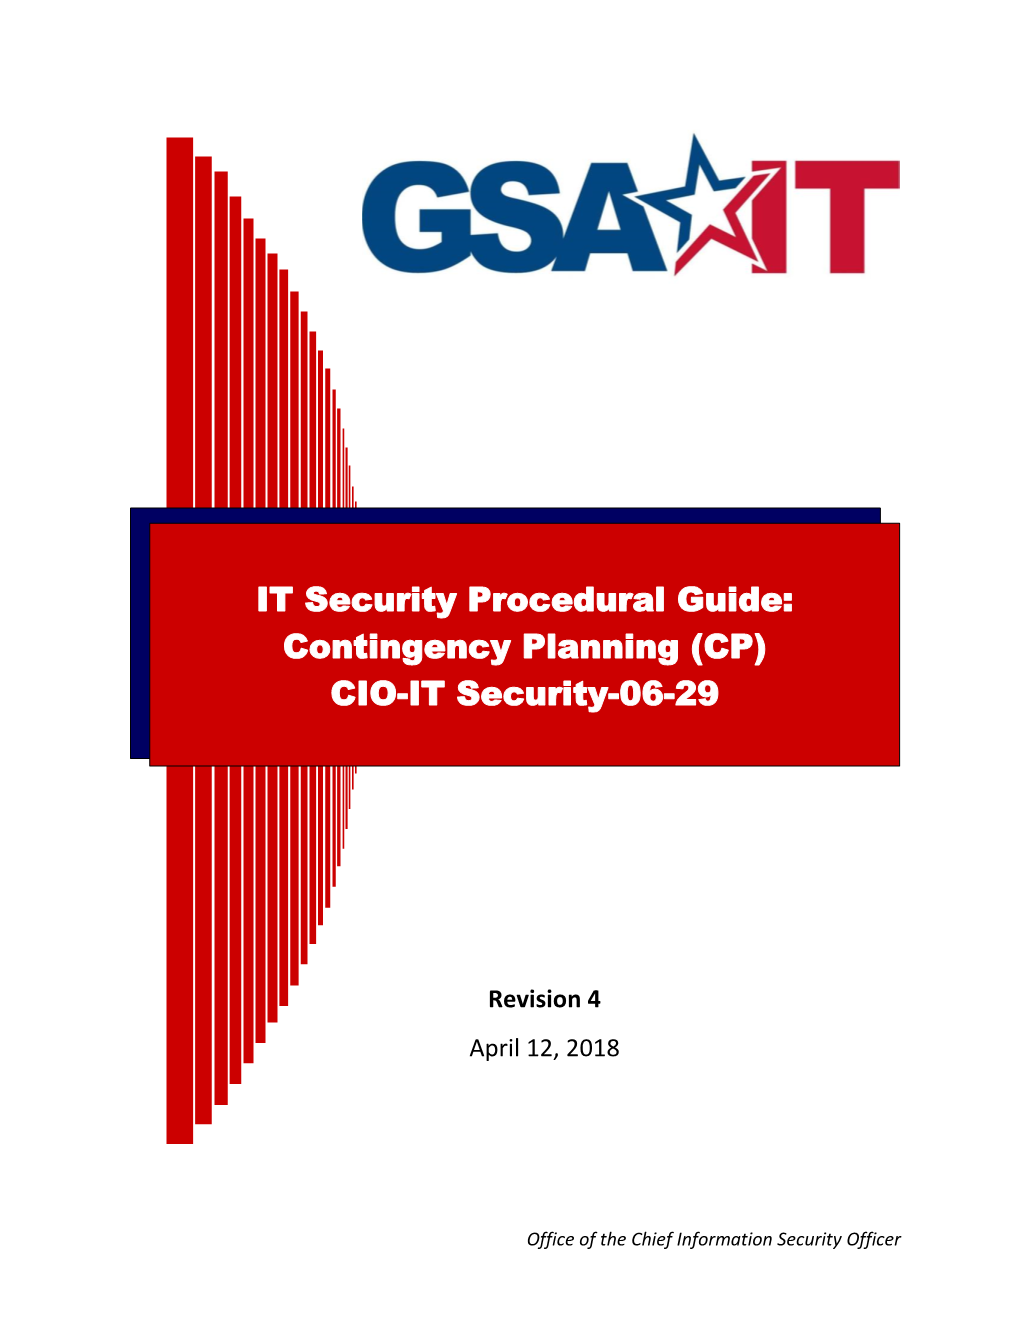 Contingency Planning (CP) CIO-IT Security-06-29] to Determine the Effectiveness of the Plan and the Organizational Readiness to Execute the Plan; B